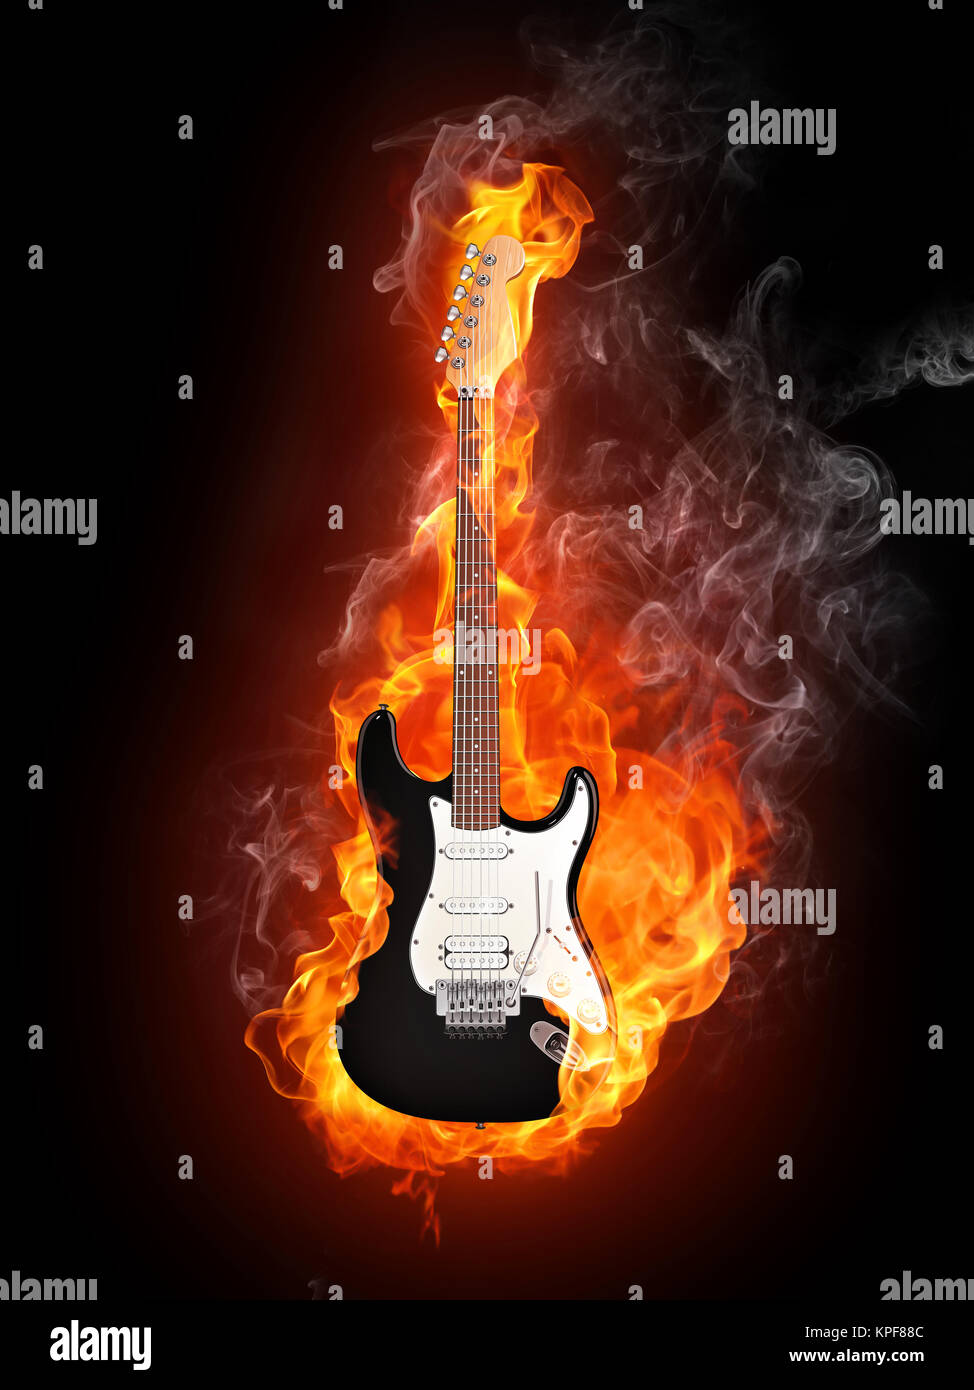 Electric Guitar in fire Isolated on Black Background. Computer Graphics. Stock Photo